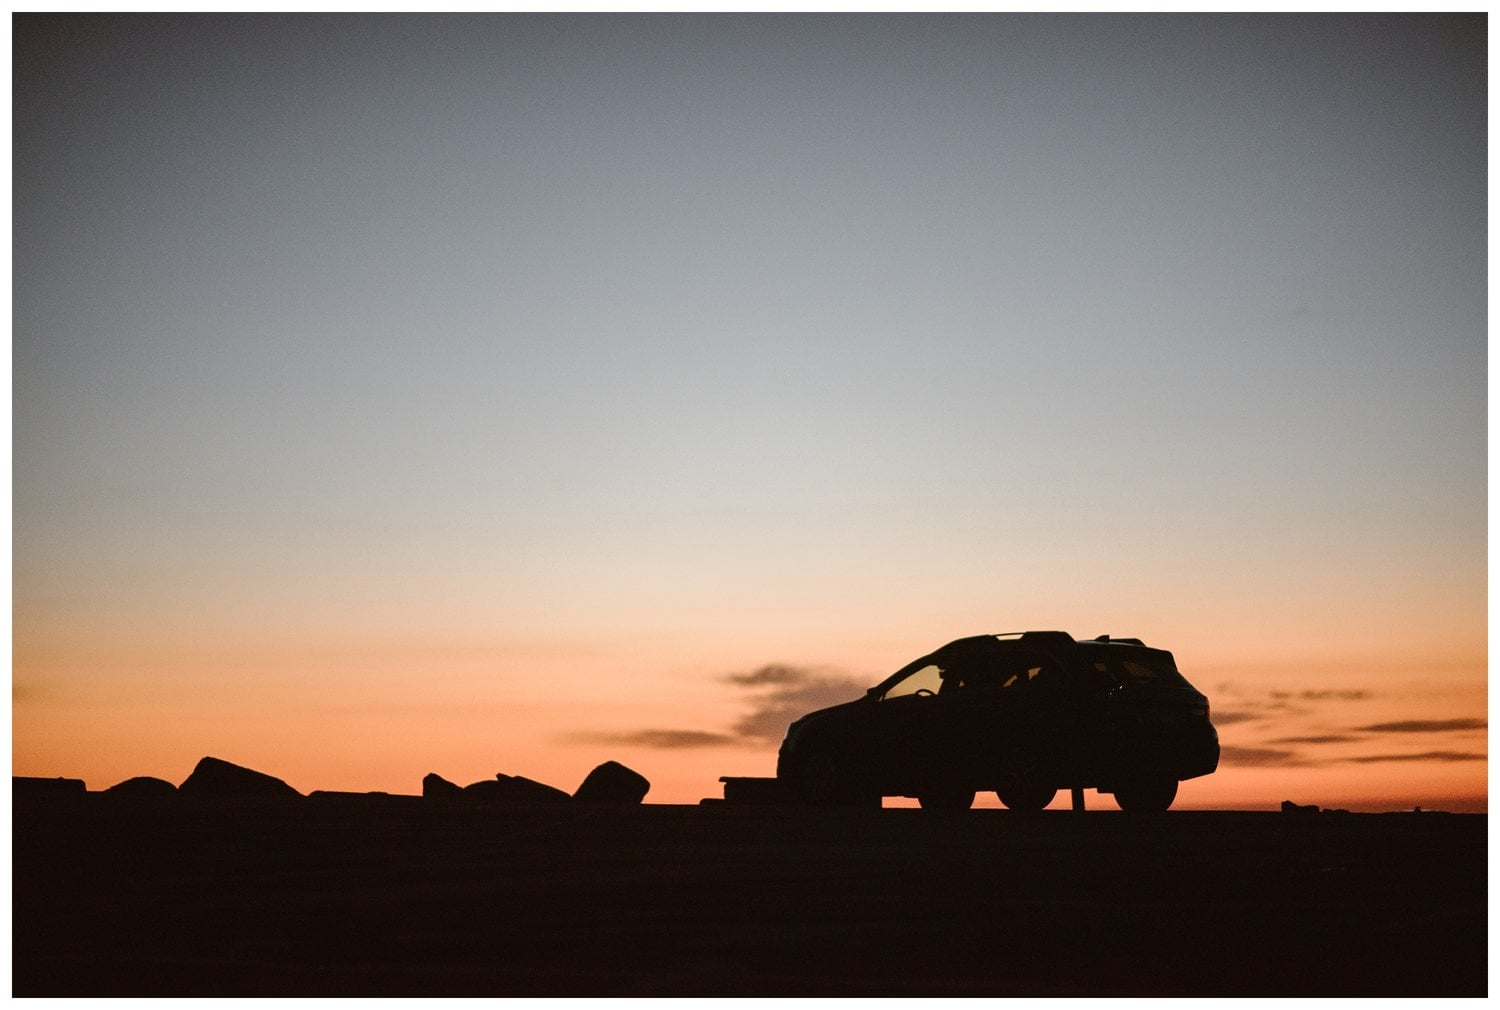 Silhouette of a car at sunrise.